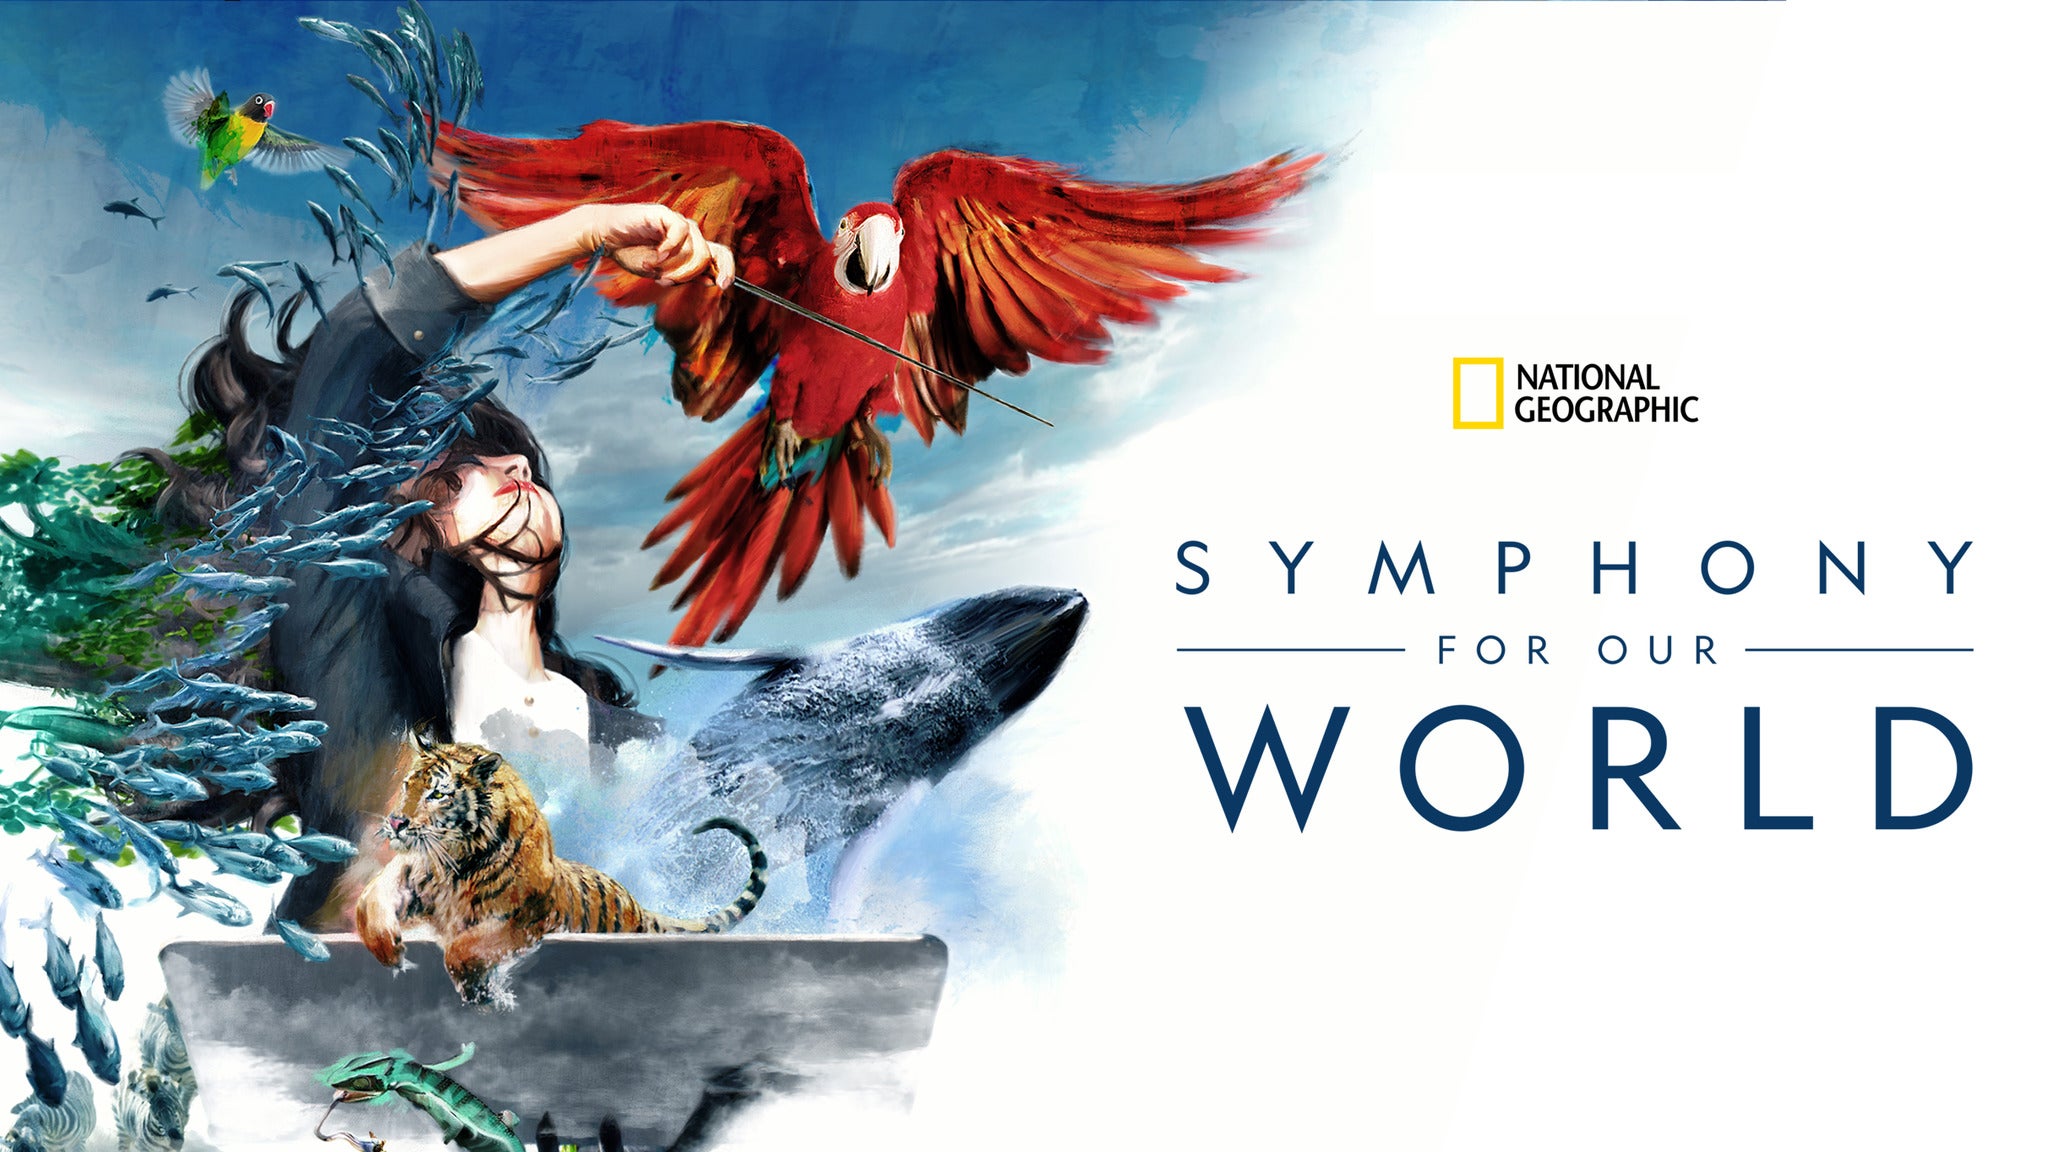 National Geographic: Symphony For Our World in Minneapolis promo photo for National Geographic Presales presale offer code